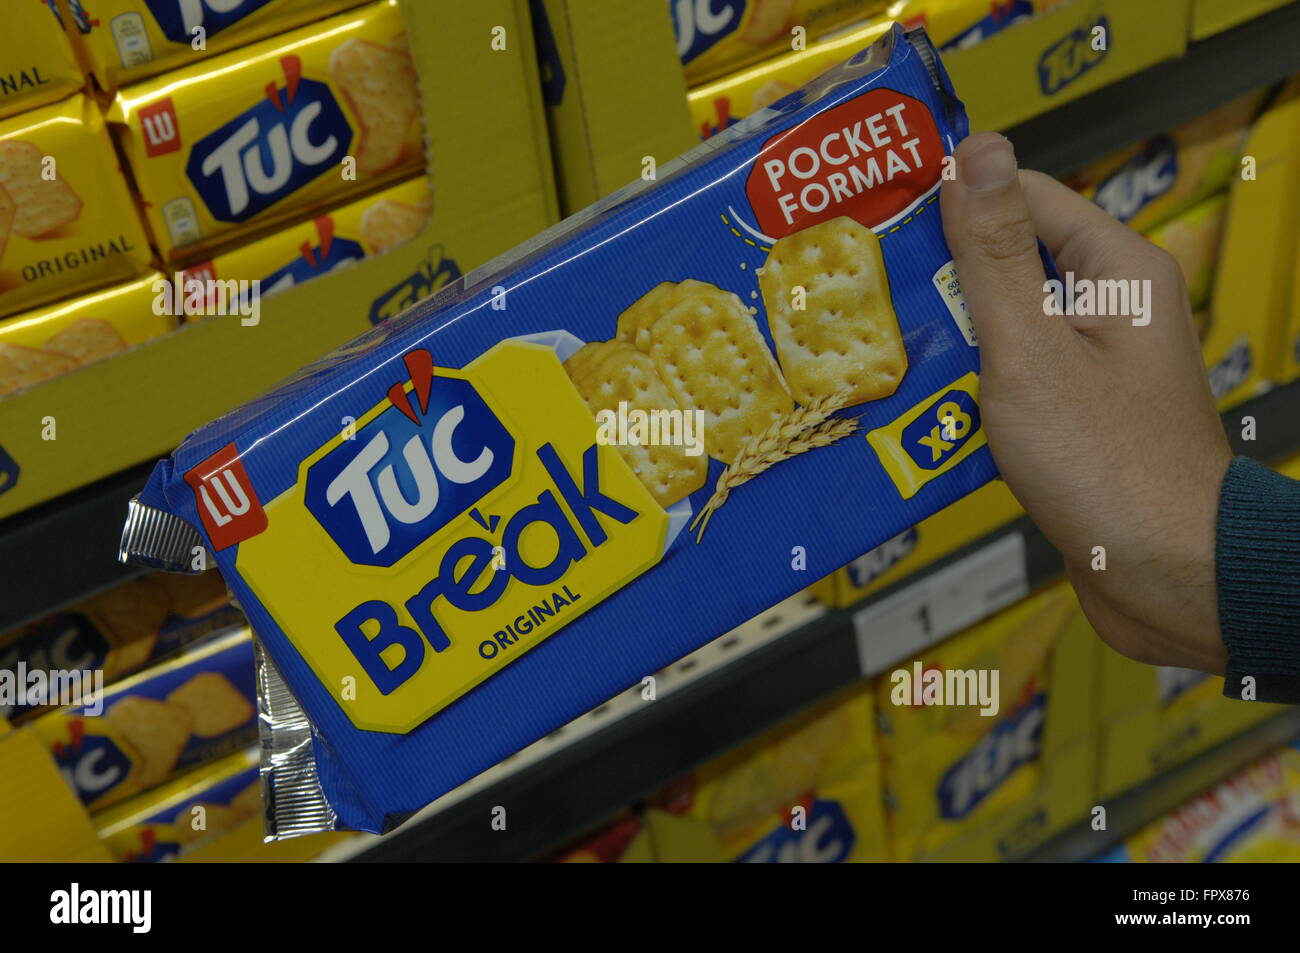 Tuc Break snack biscuits original made by Jacob Fruitfield Food Group, part of the Valeo Foods Group, Stock Photo